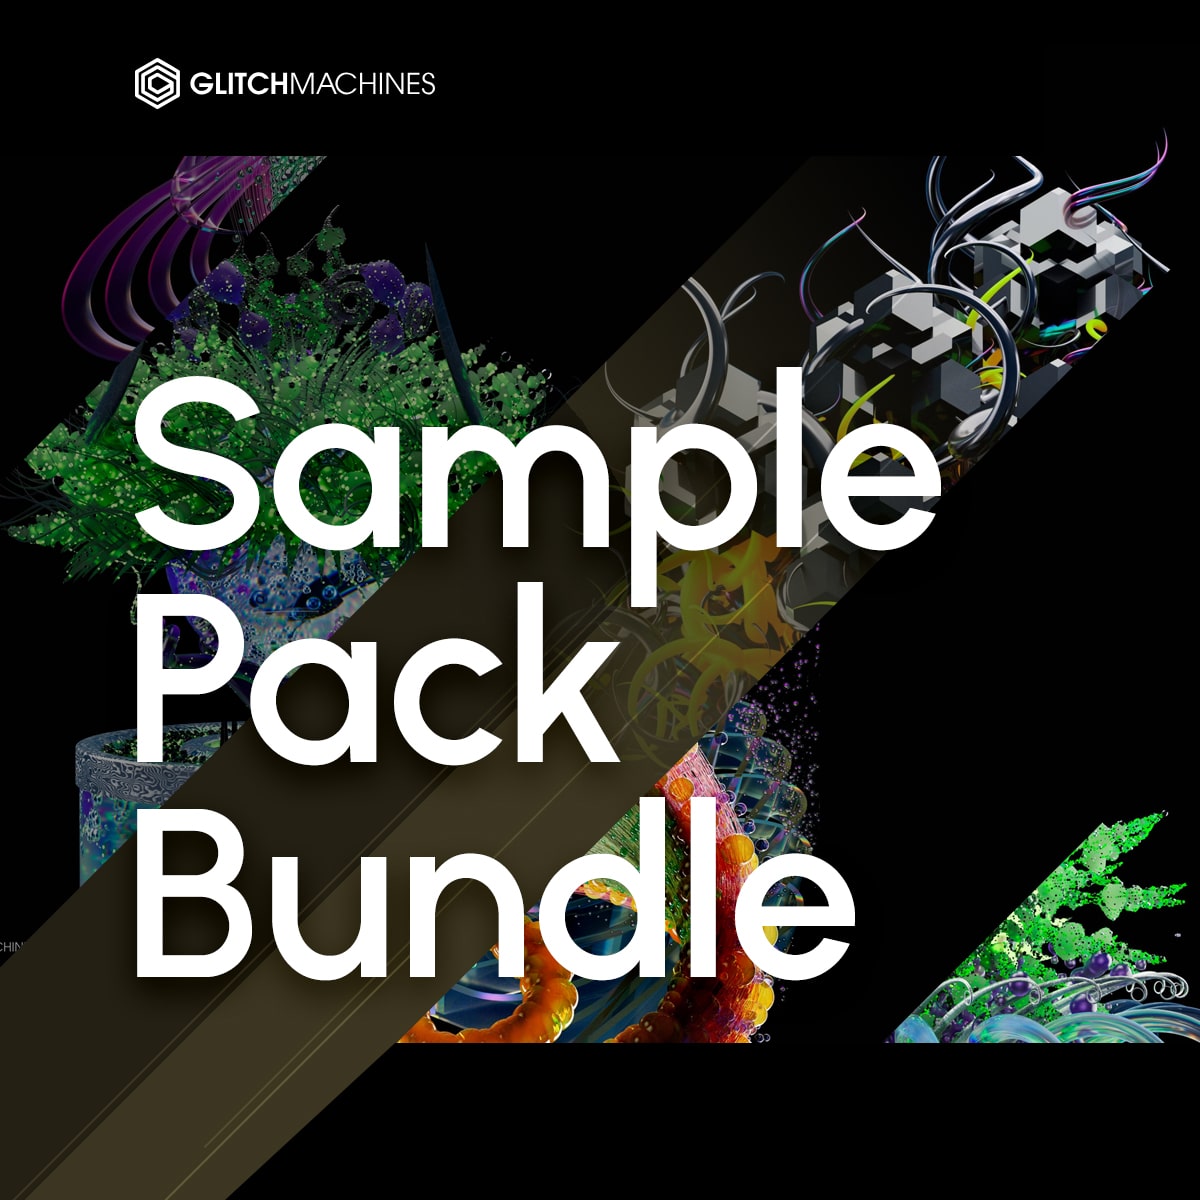 95% off “Sample Pack Bundle” by Glitchmachines